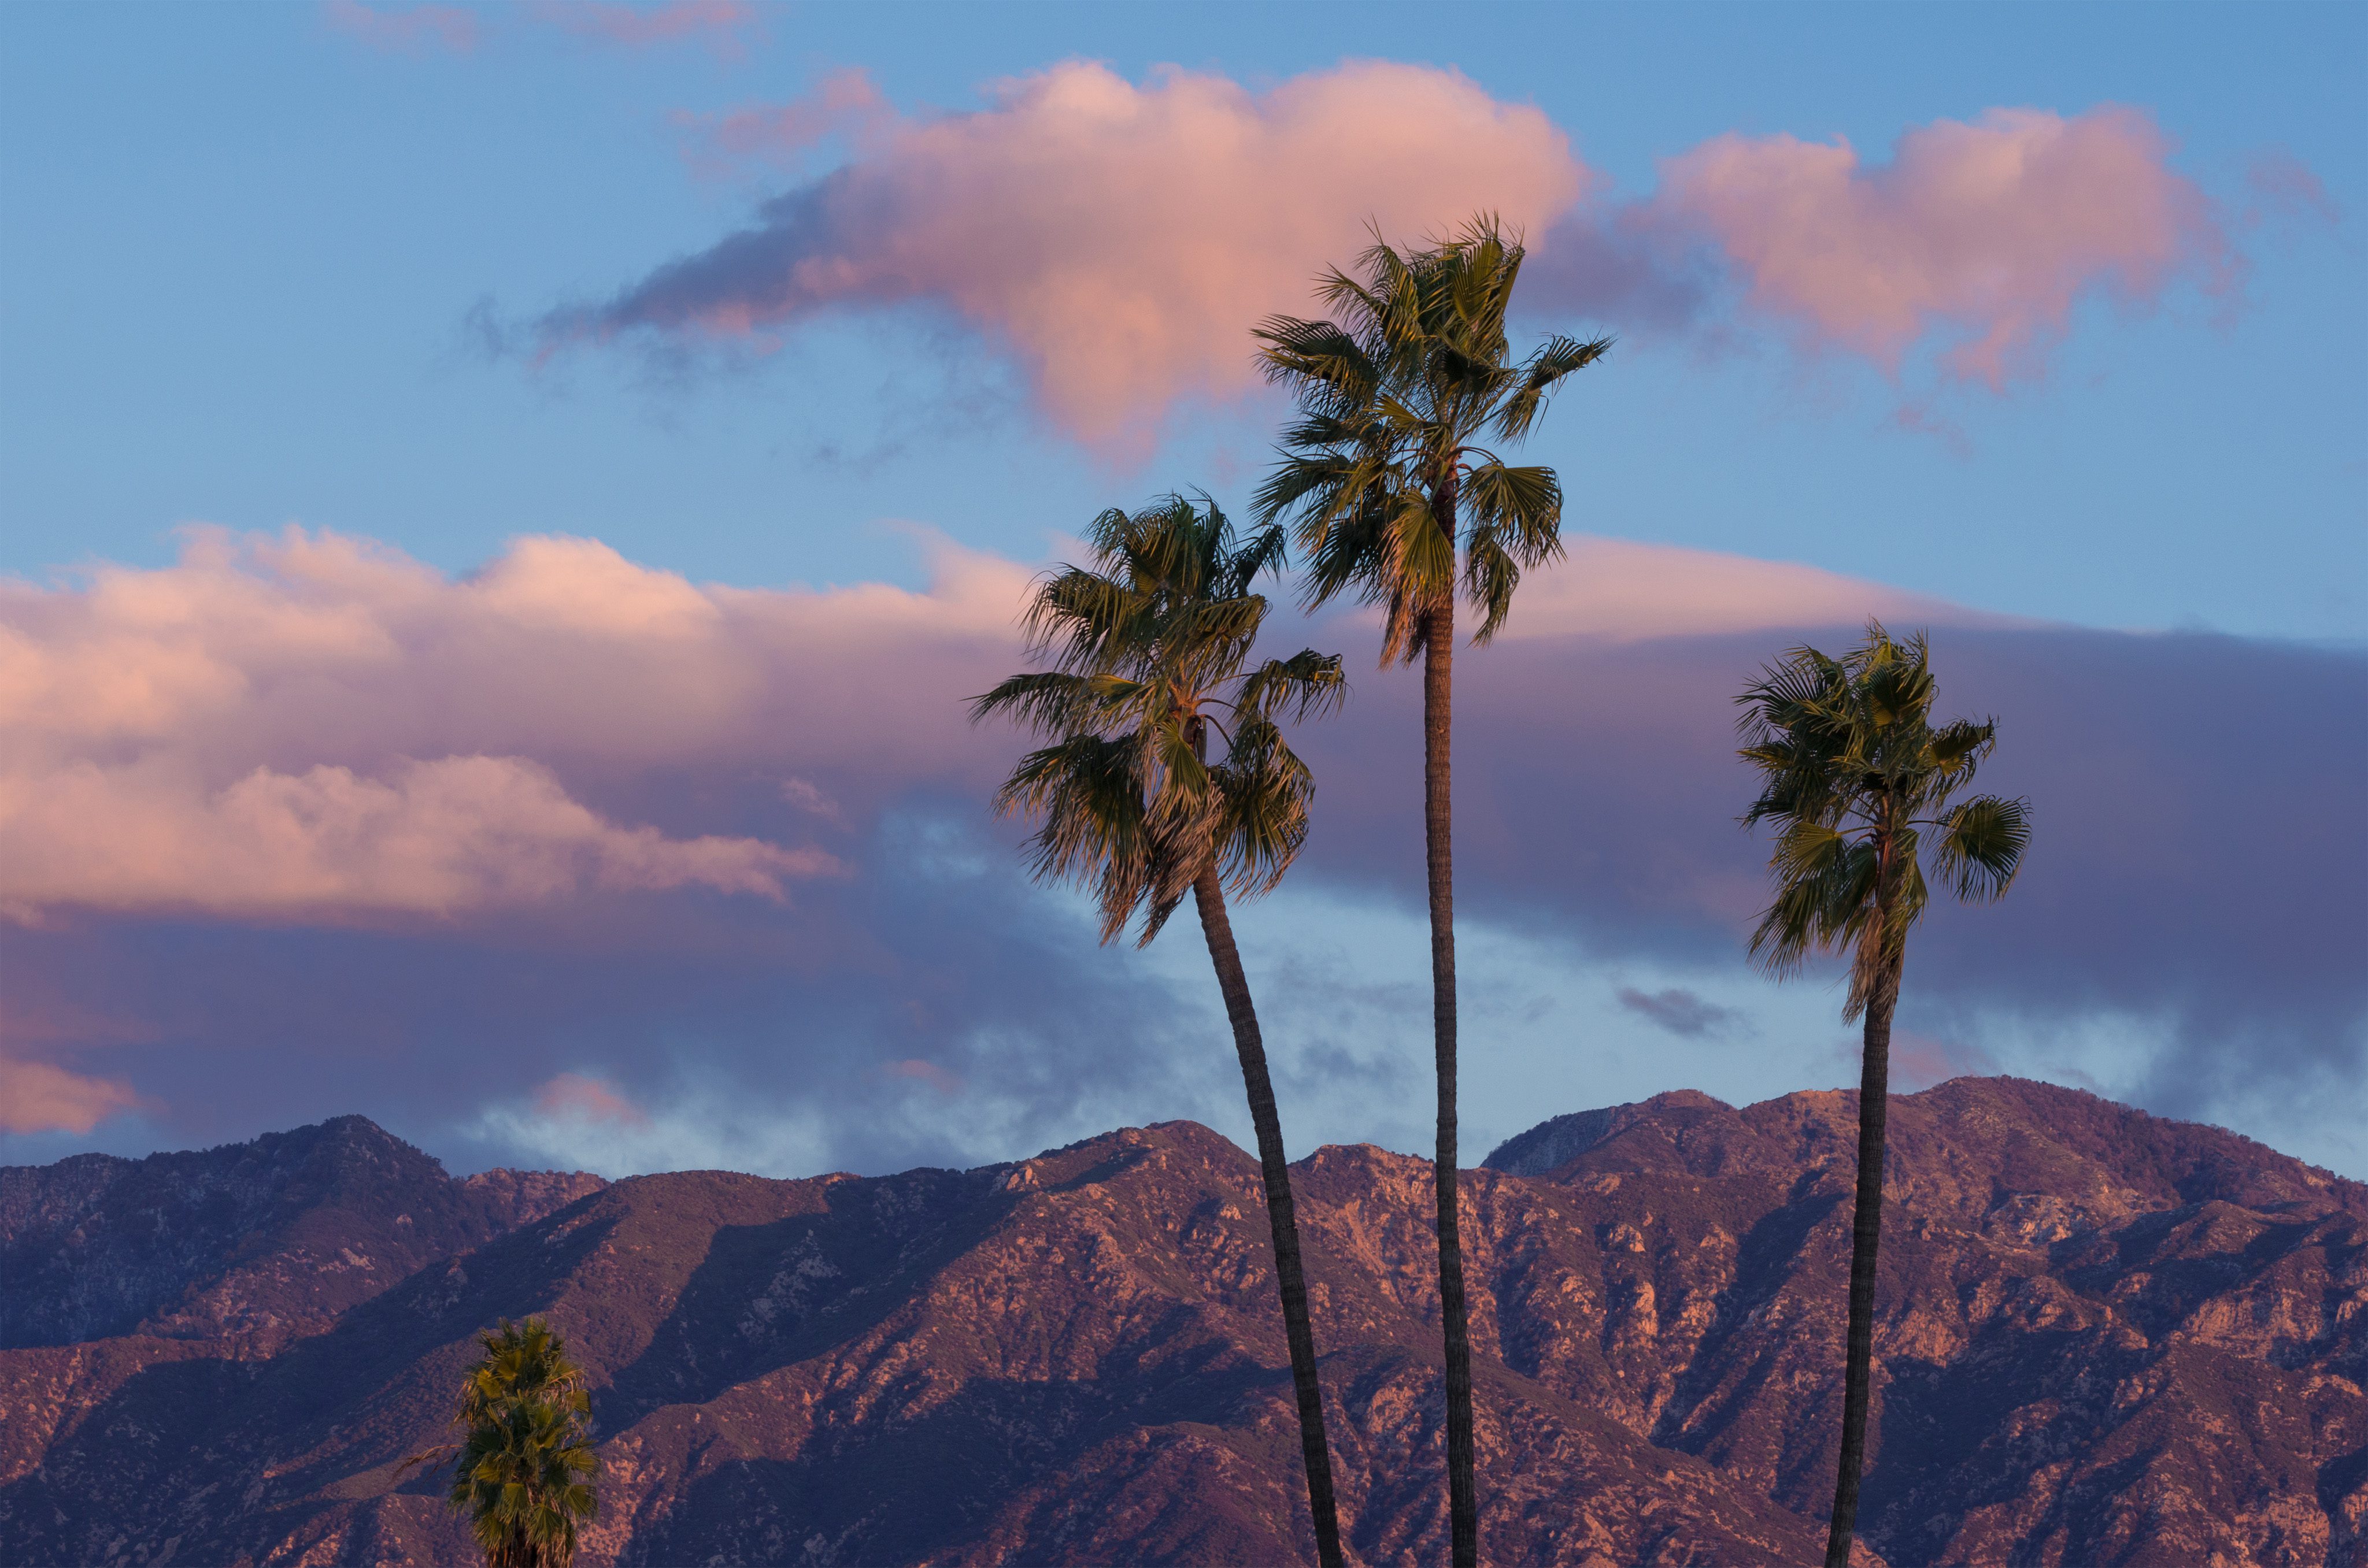 Pasadena hills with three palm trees against a cloudy sky